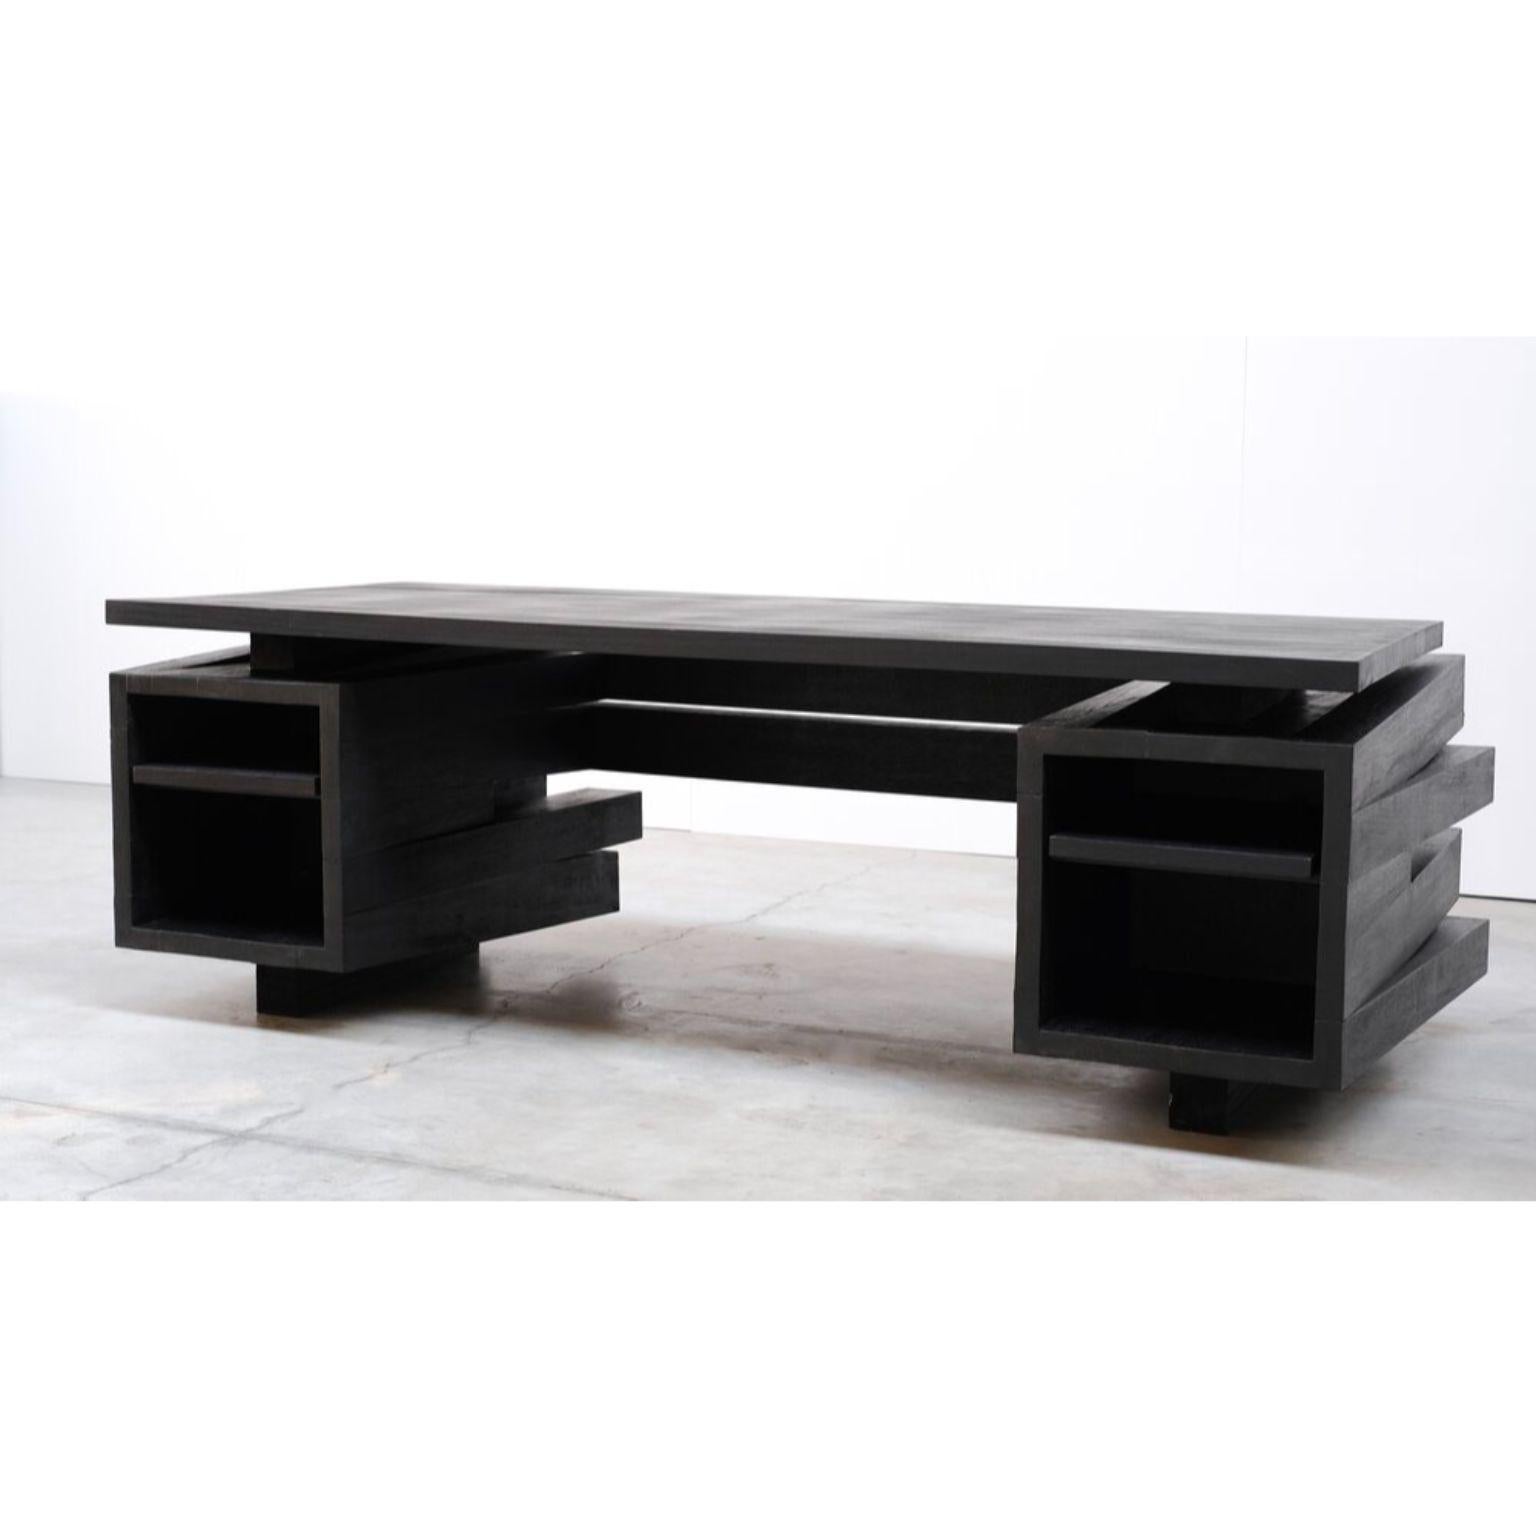 Desk in iroko wood by Arno Declercq
Edition of 12 pieces
Dimensions: W 233 x D 100 x H 75 cm 
Materials: Burned and waxed iroko wood

Arno Declercq
Belgian designer and art dealer who makes bespoke objects with passion for design, atmosphere,